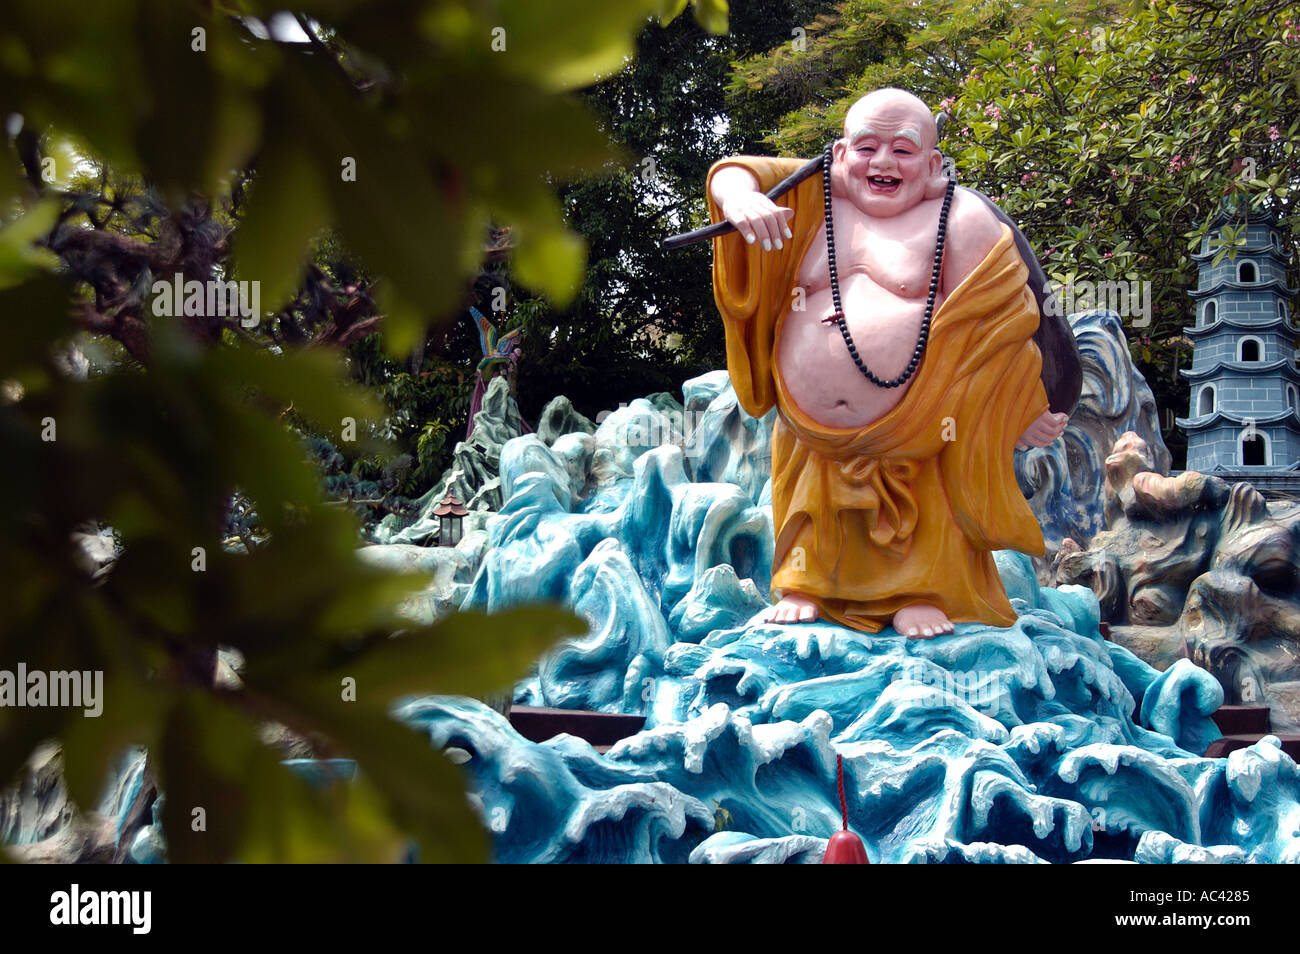 Haw Par Villa theme park in Singapore. statues and giant dioramas of ...